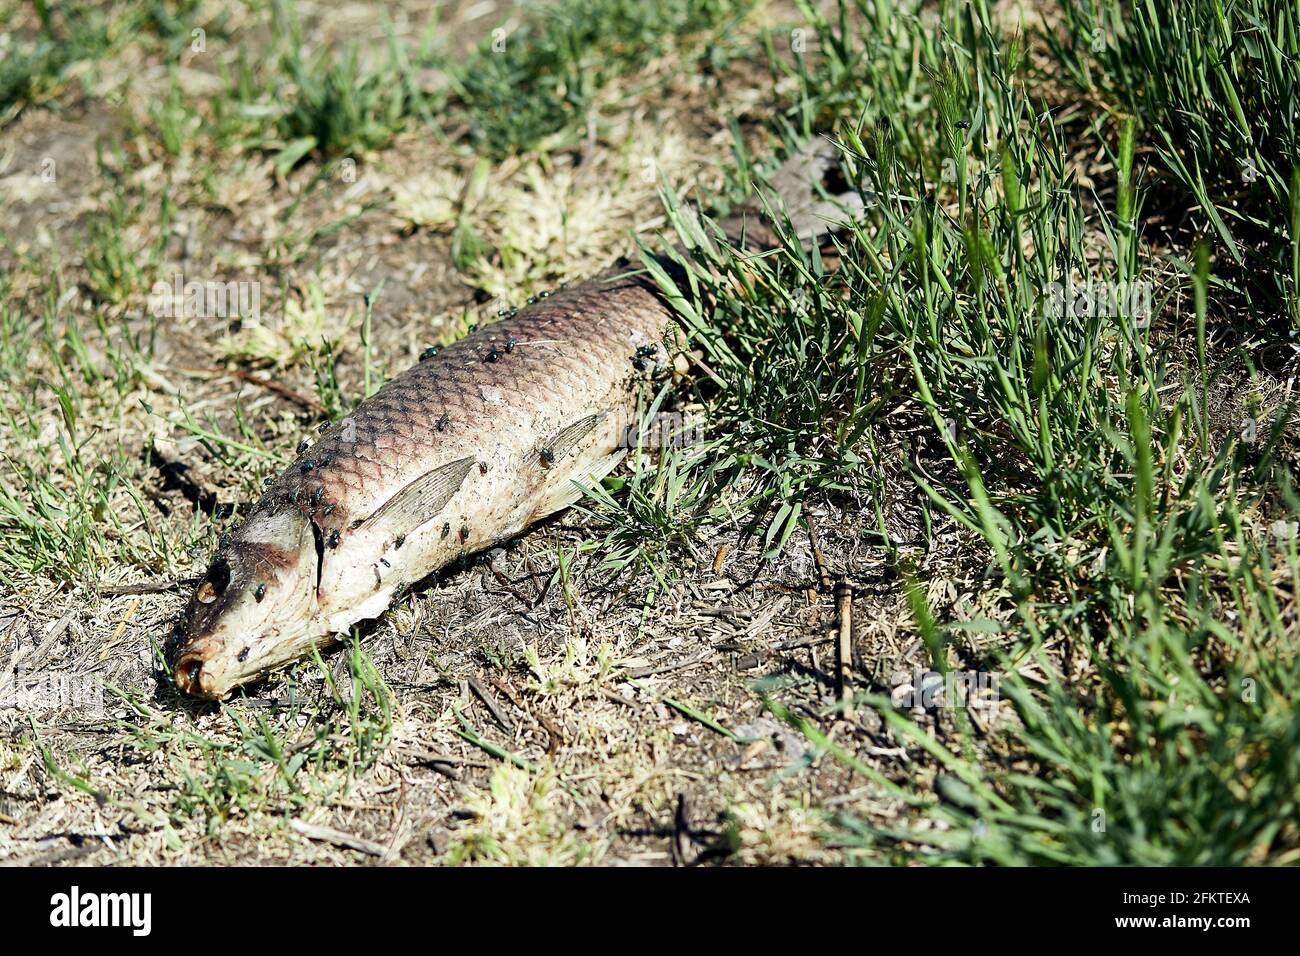 Dead fish on the grass. Environmental pollution problems. Poor ecology concept. Hot summer, climate change. High quality photo Stock Photo